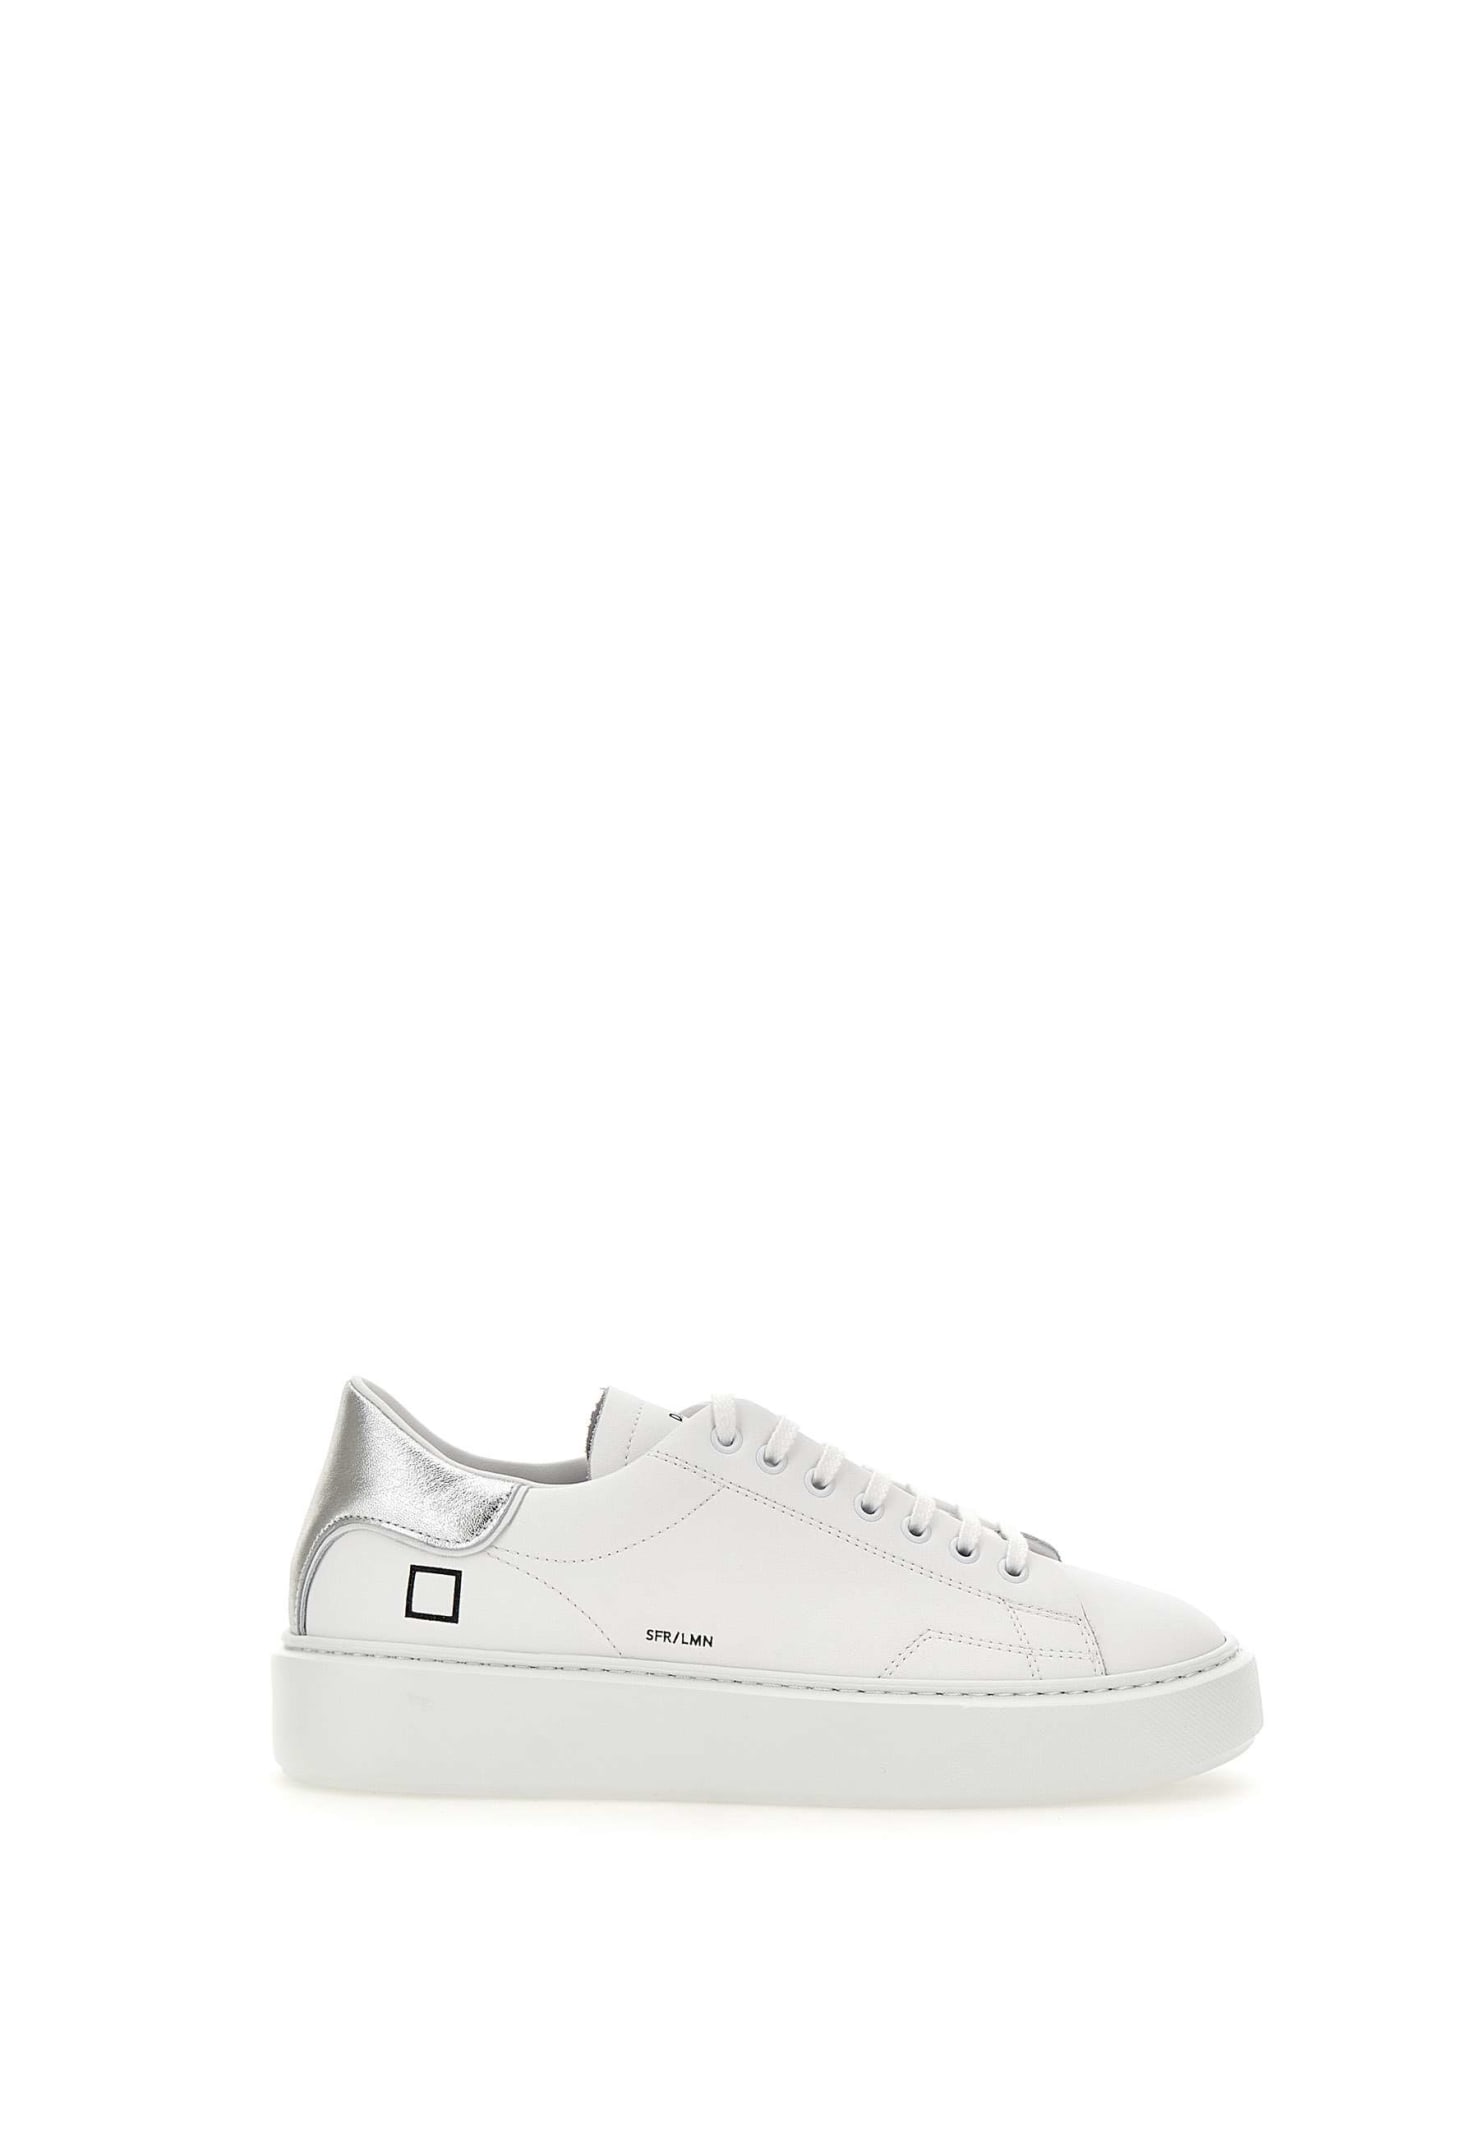 Shop Date Sfera Laminated Leather Sneakers In White